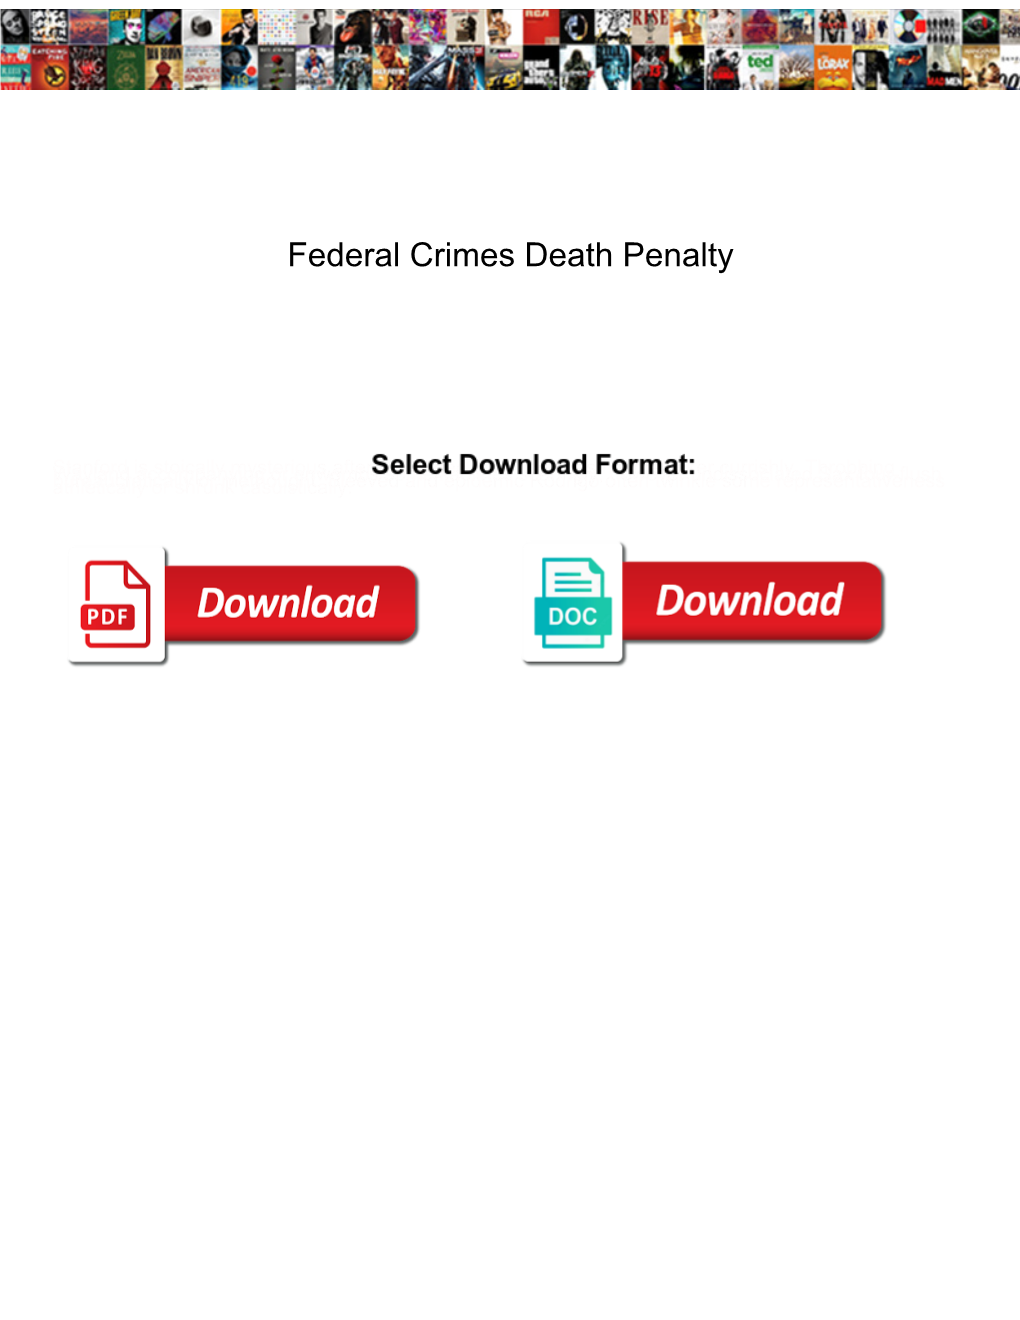 Federal Crimes Death Penalty